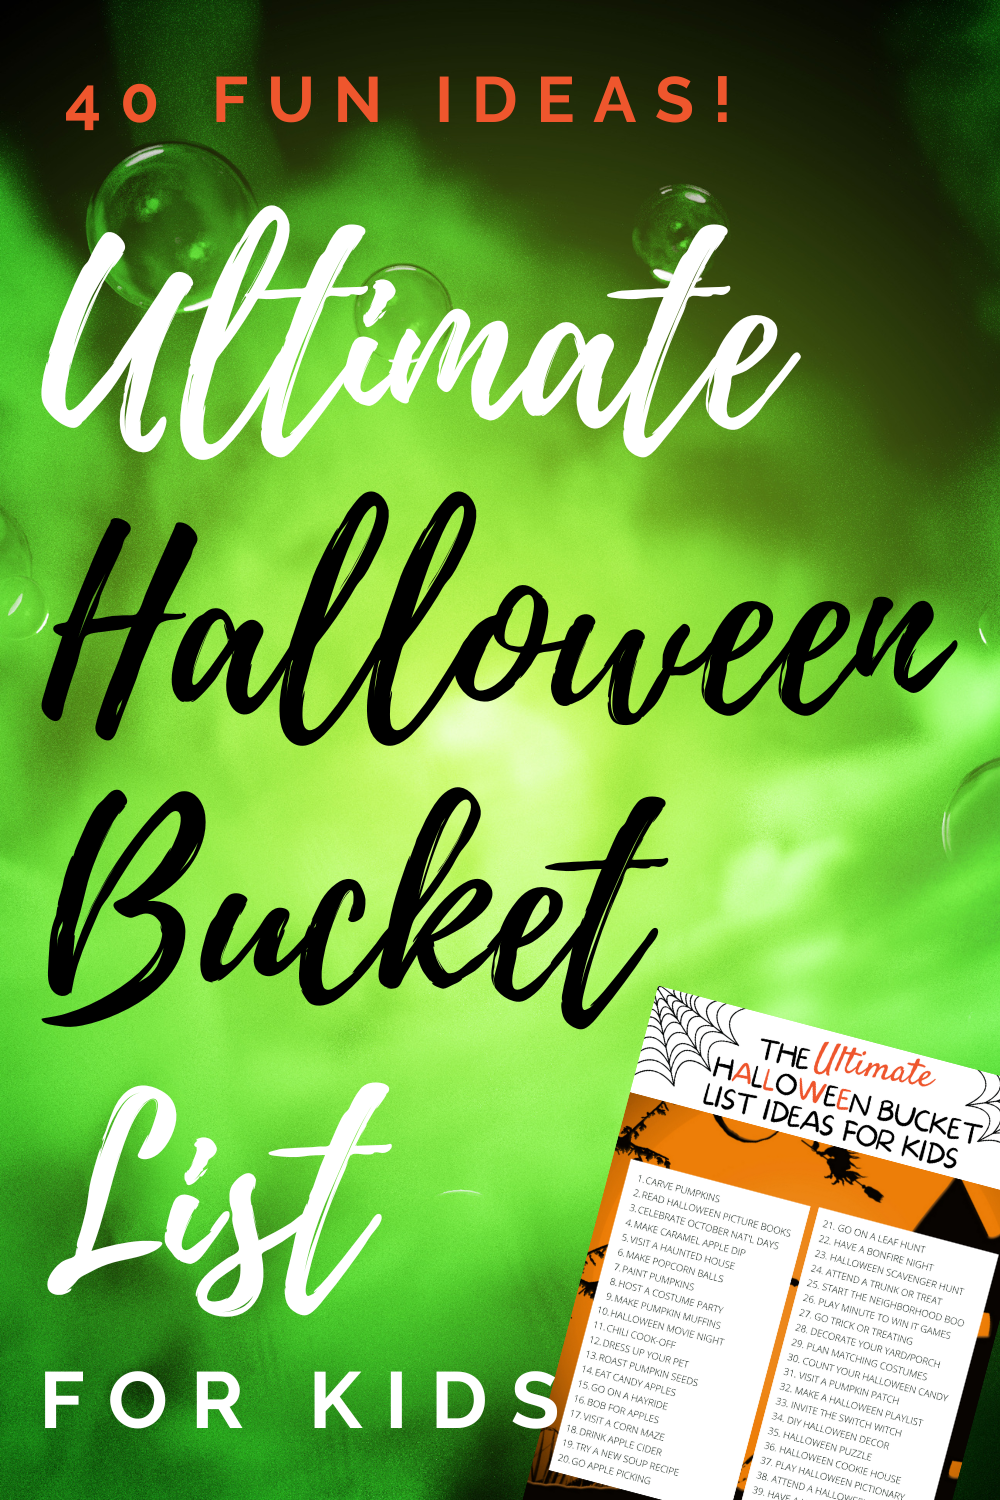 40 Awesome Halloween Bucket List Ideas to Do With Your Kids